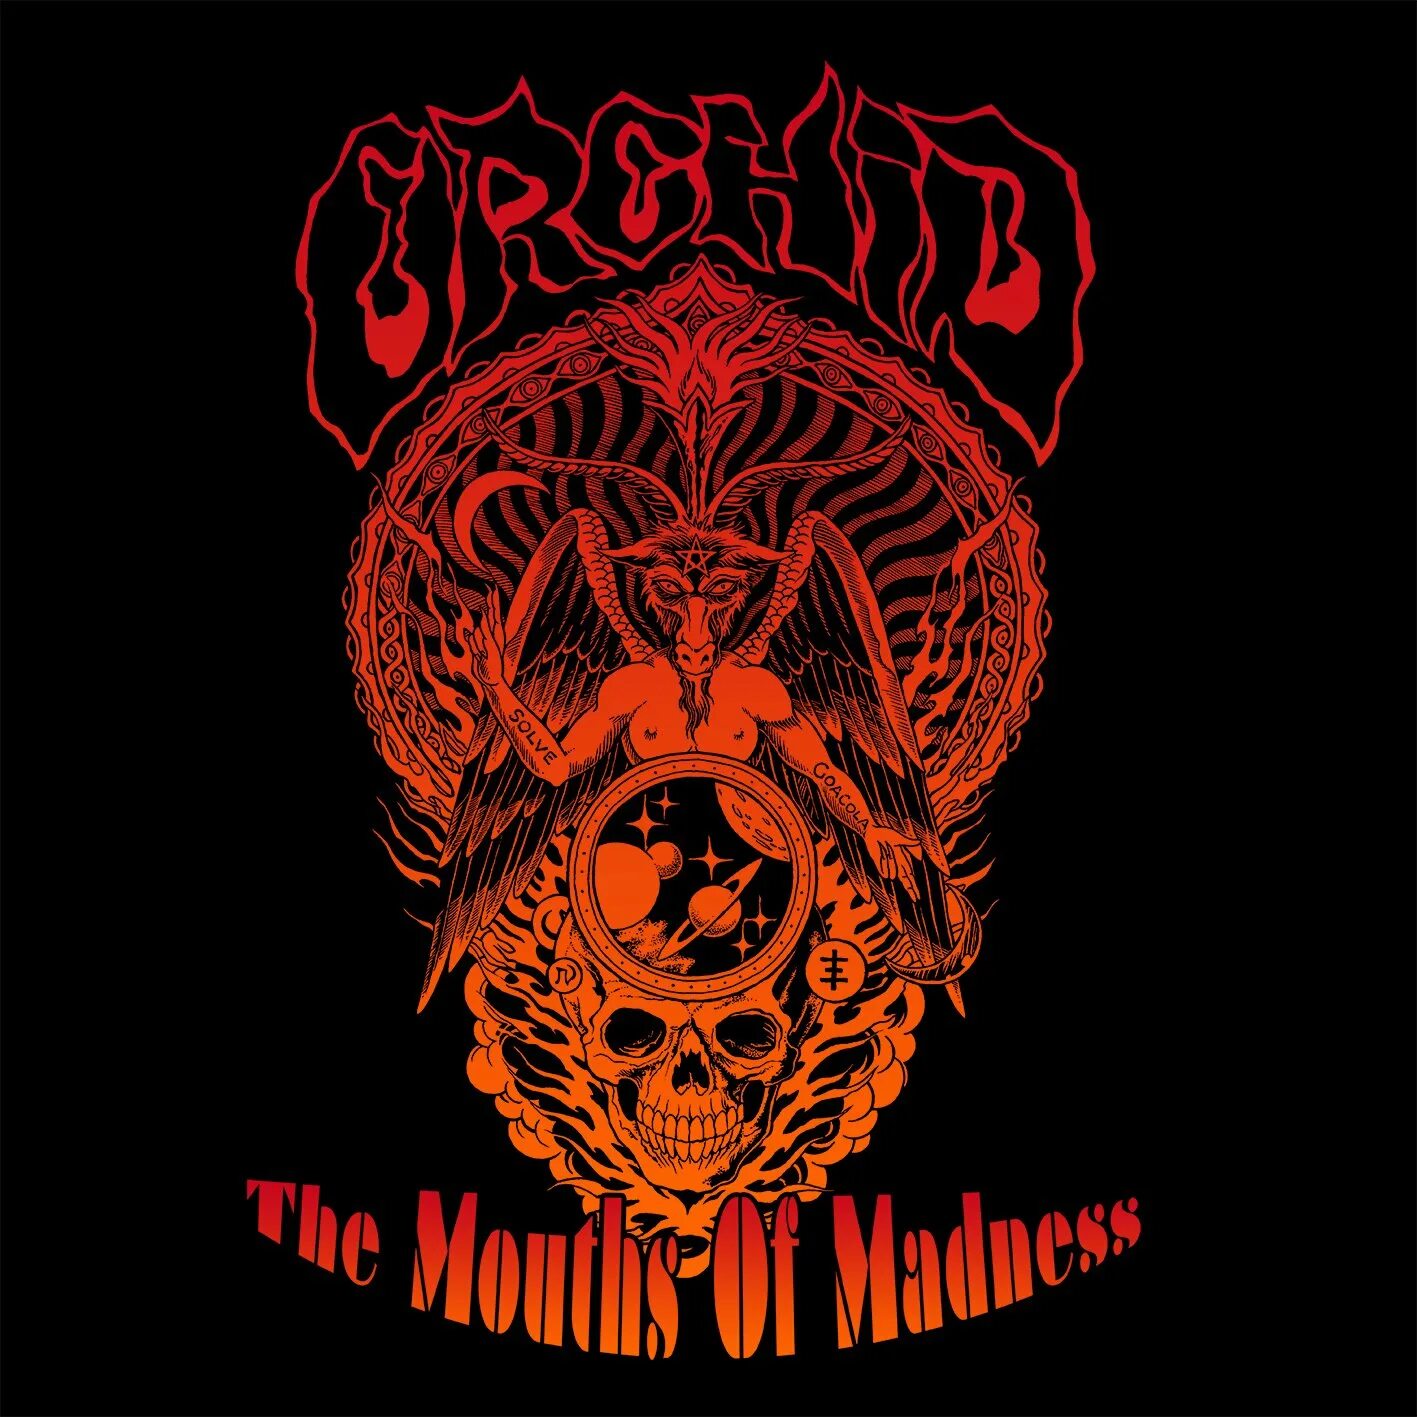 Orchid - through the Devil's doorway (2009). Orchid American Doom Metal. Orchid - the Zodiac sessions (2013).